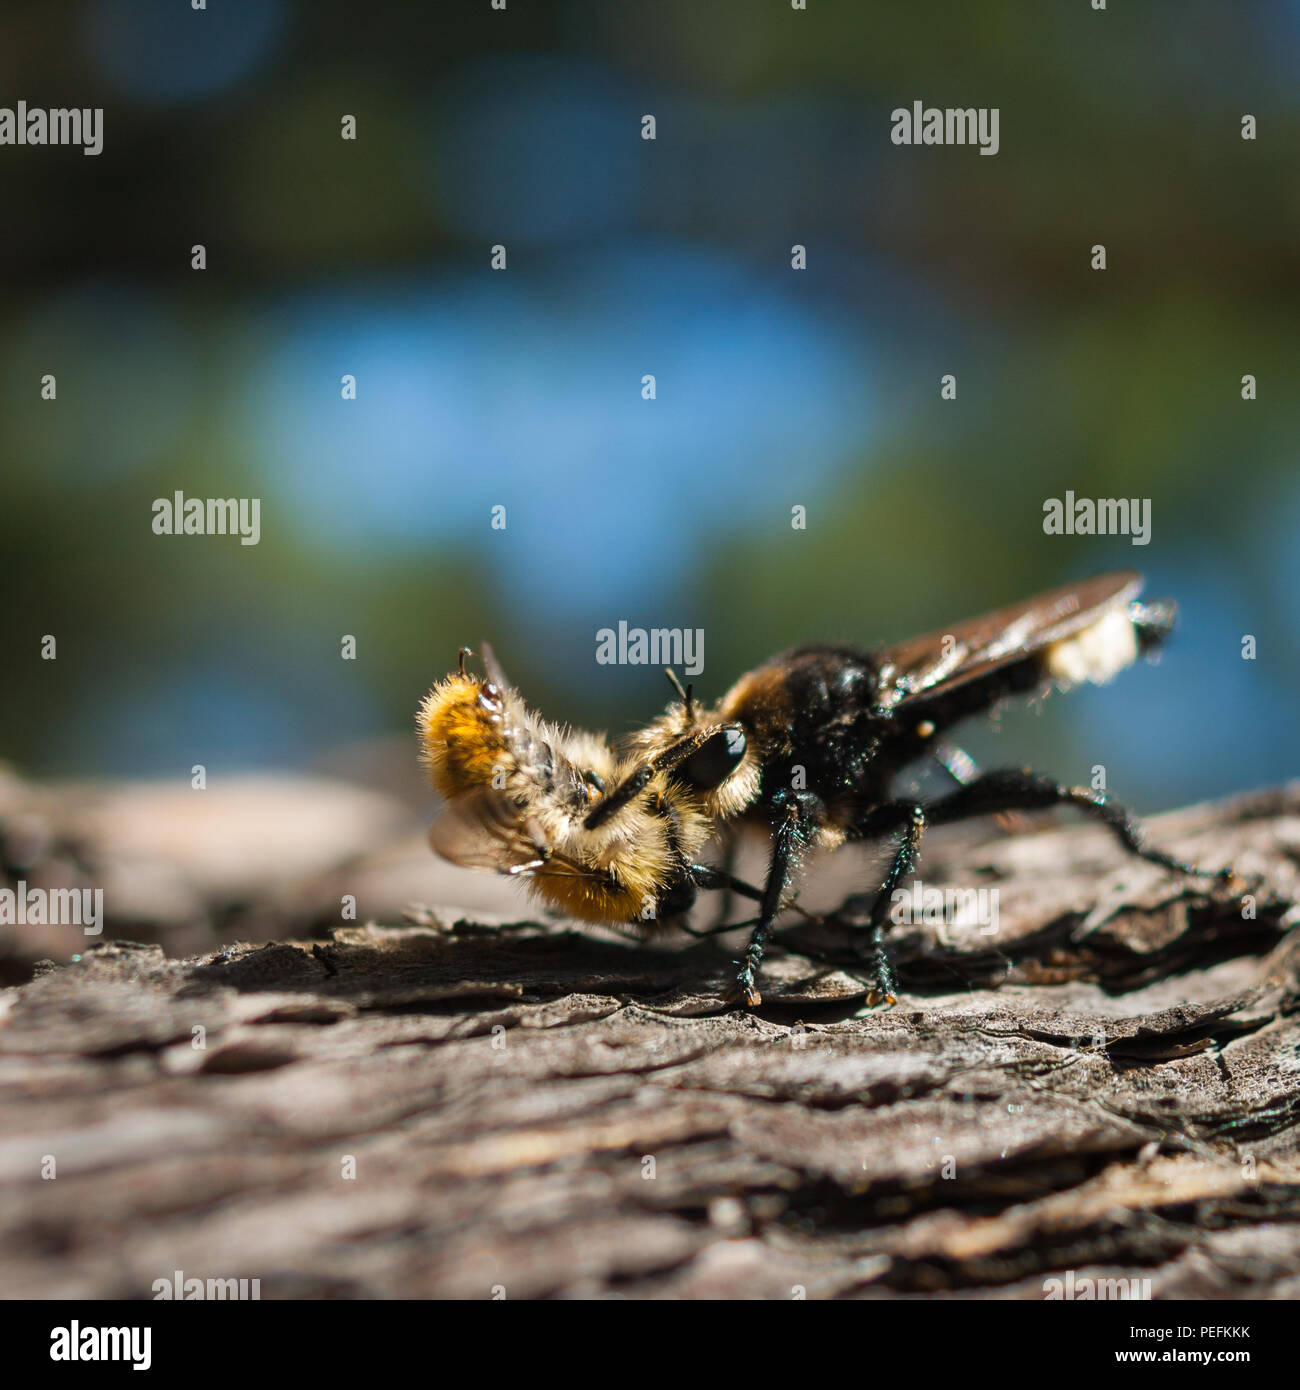 Closeup view of a European Hornet (Vespa crabro) holding prey, wild bee, on a pine tree trunk on a sunny simmer day Stock Photo